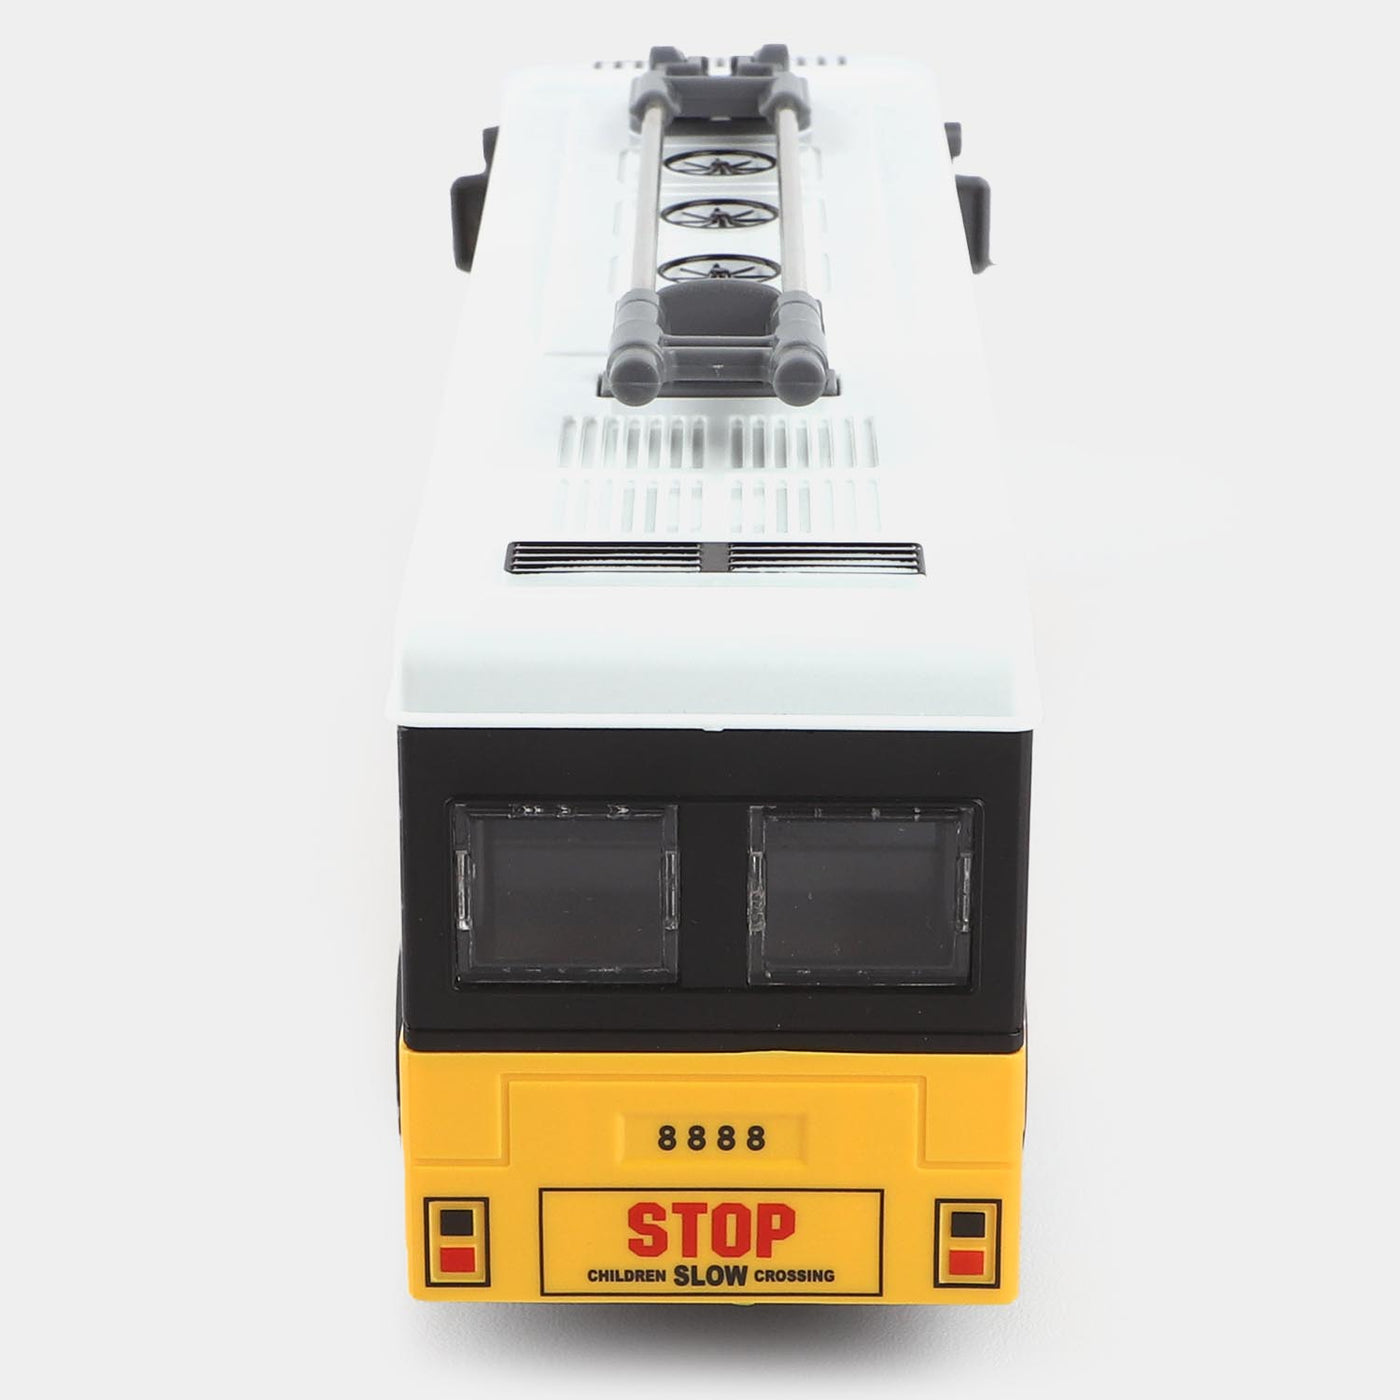 Remote Control Bus Toy For Kids